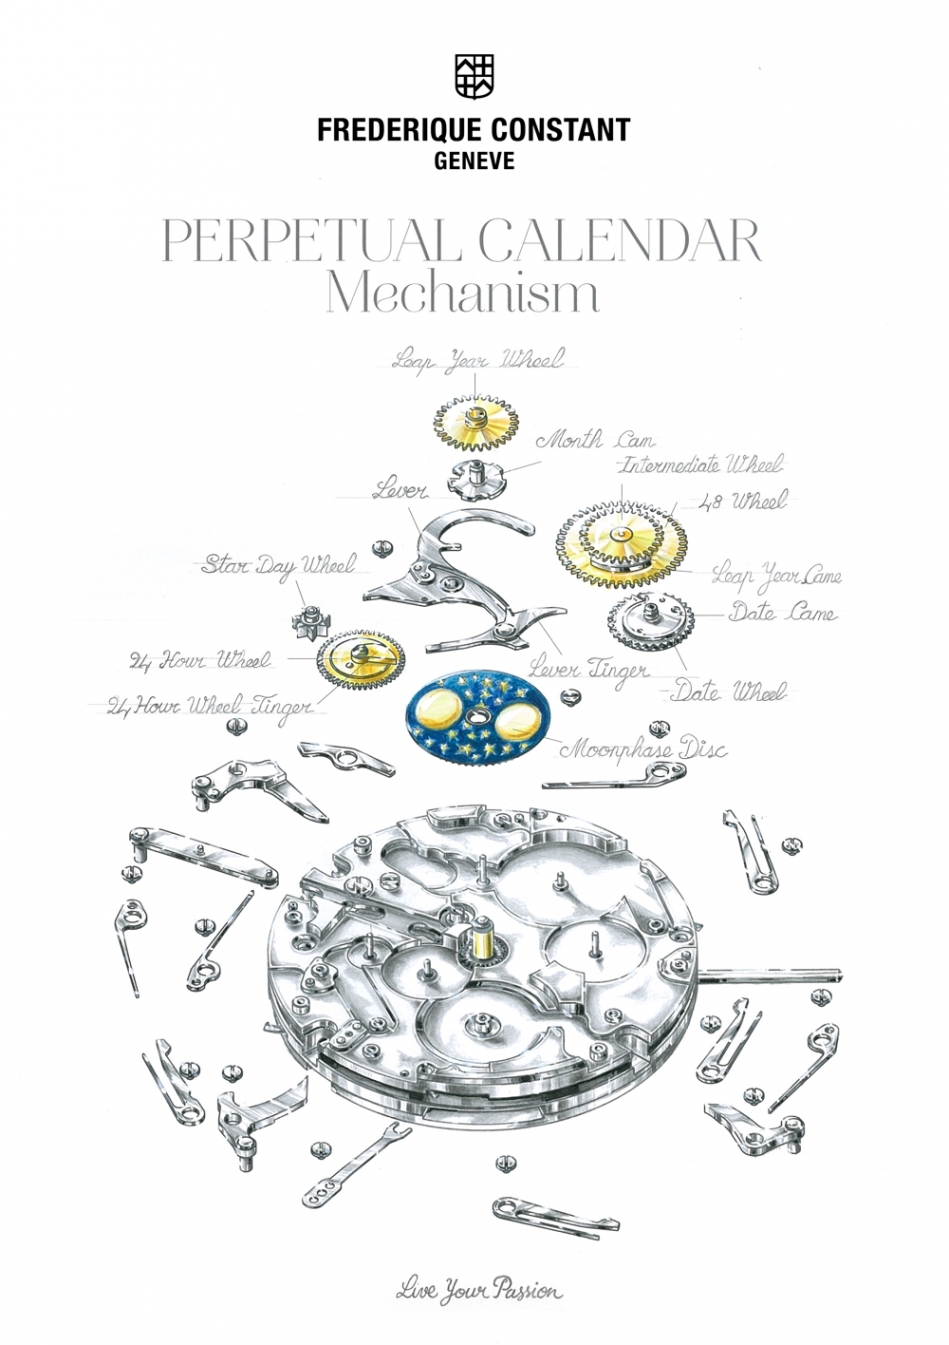 Frederique_Constant_Manufacture_Perpetual_Calendar_2016_FC-775_Technical_Drawing.jpg